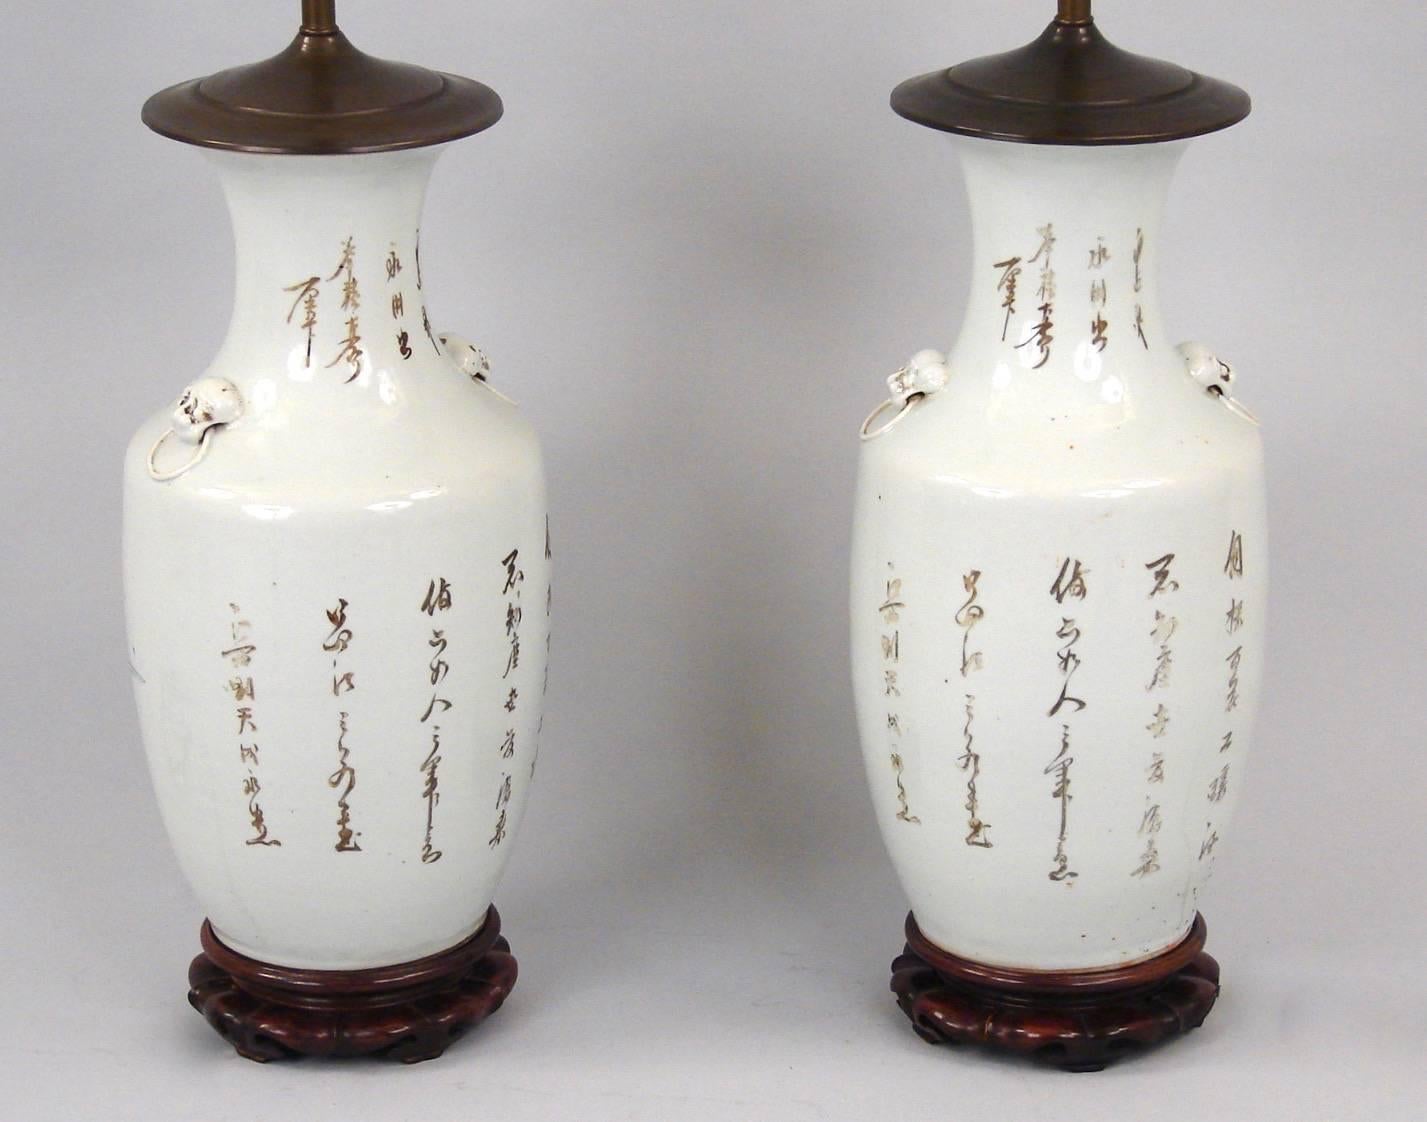 A pretty pair of Chinese porcelain vases, now electrified, decorated overall with figures in a garden setting in tones of brown, pale blue and rose, the backs with Chinese characters, late 19th century.